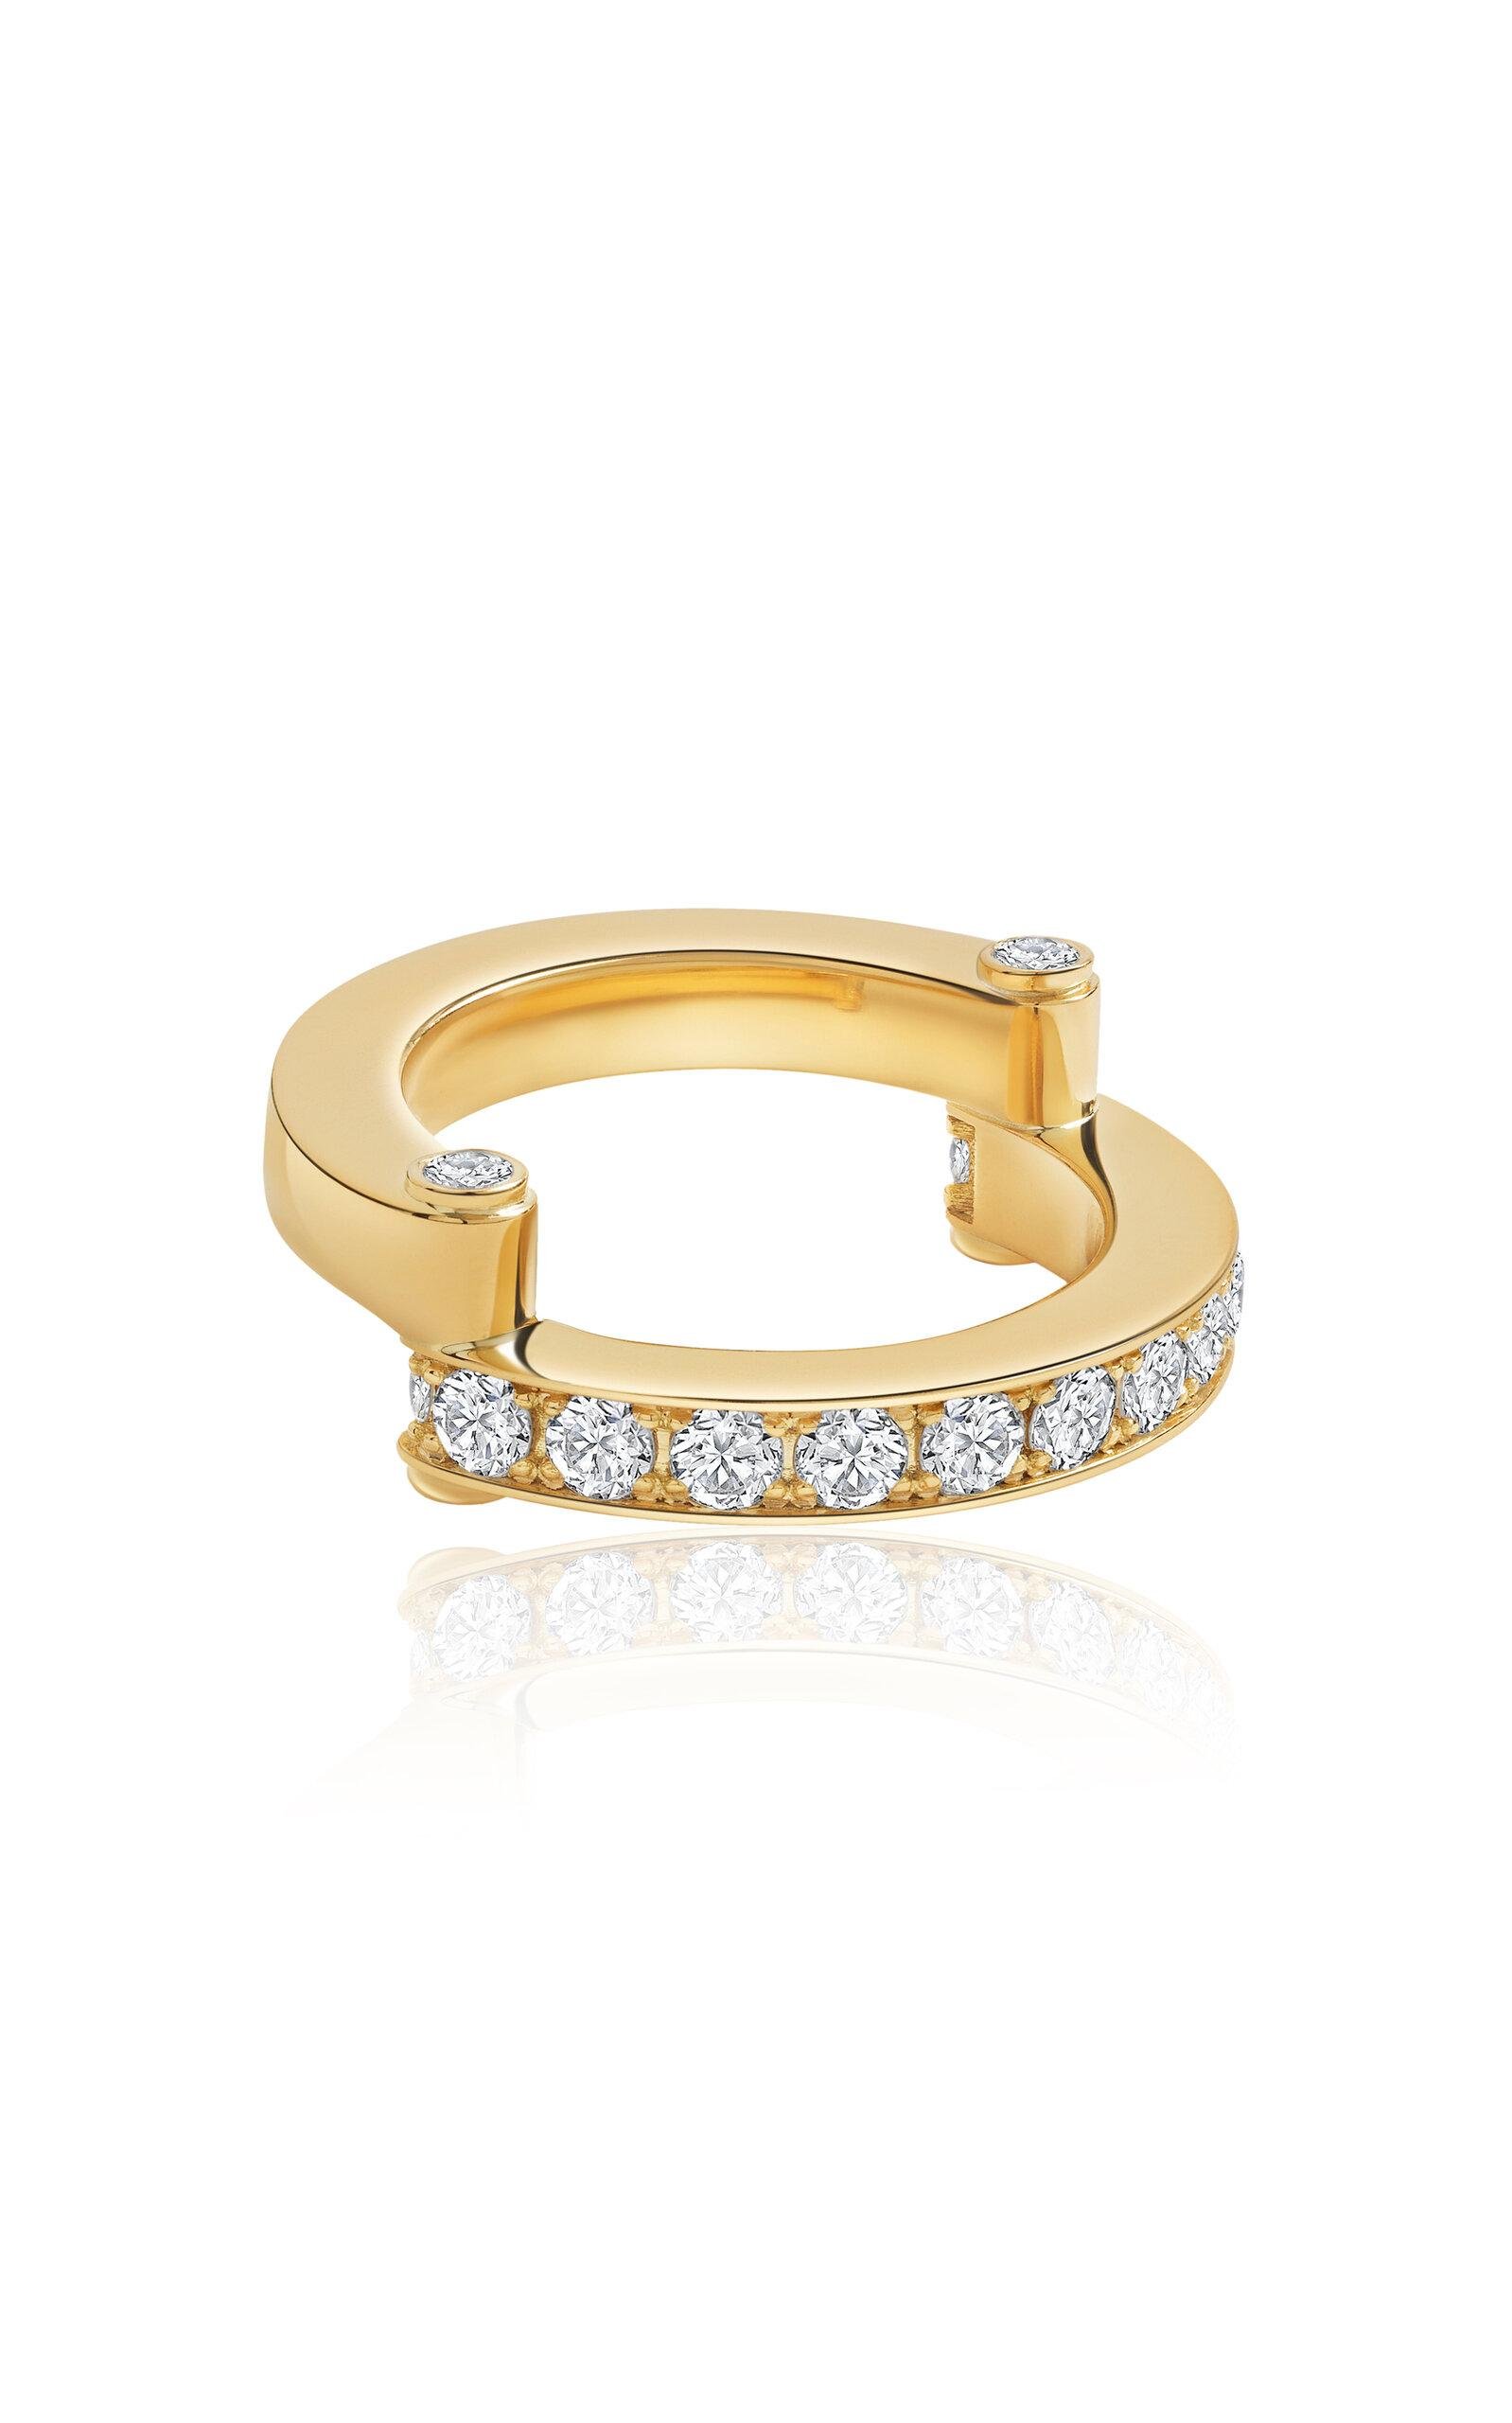 Erede - 18k Yellow Gold Hinged Pavé Ring - Gold - US 3.5 - Only At Moda Operandi - Gifts For Her by EREDE